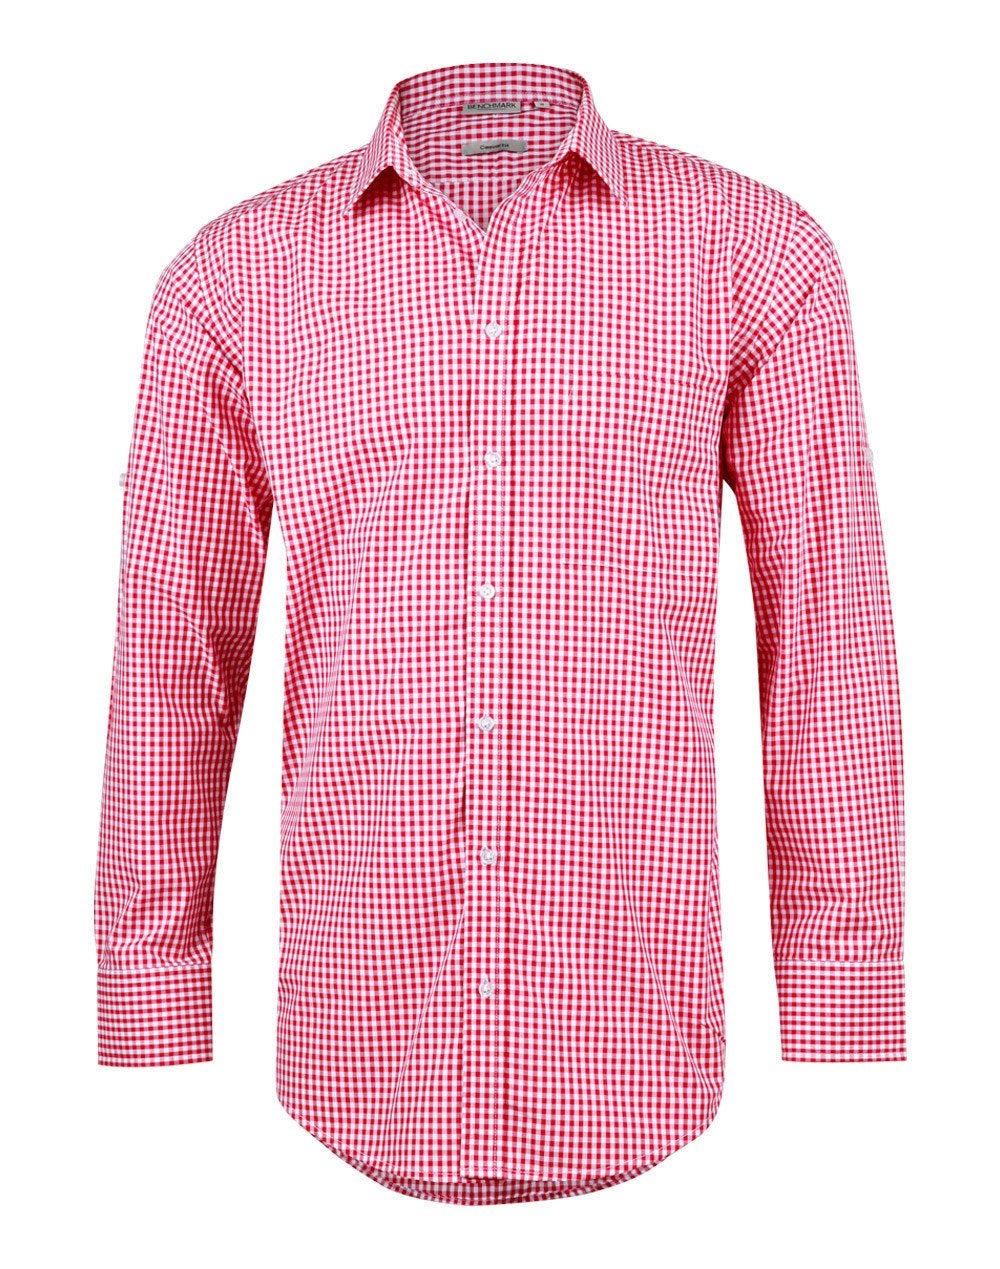 Buy custom branded Men’s Gingham Check Long Sleeve Shirts with your logo!